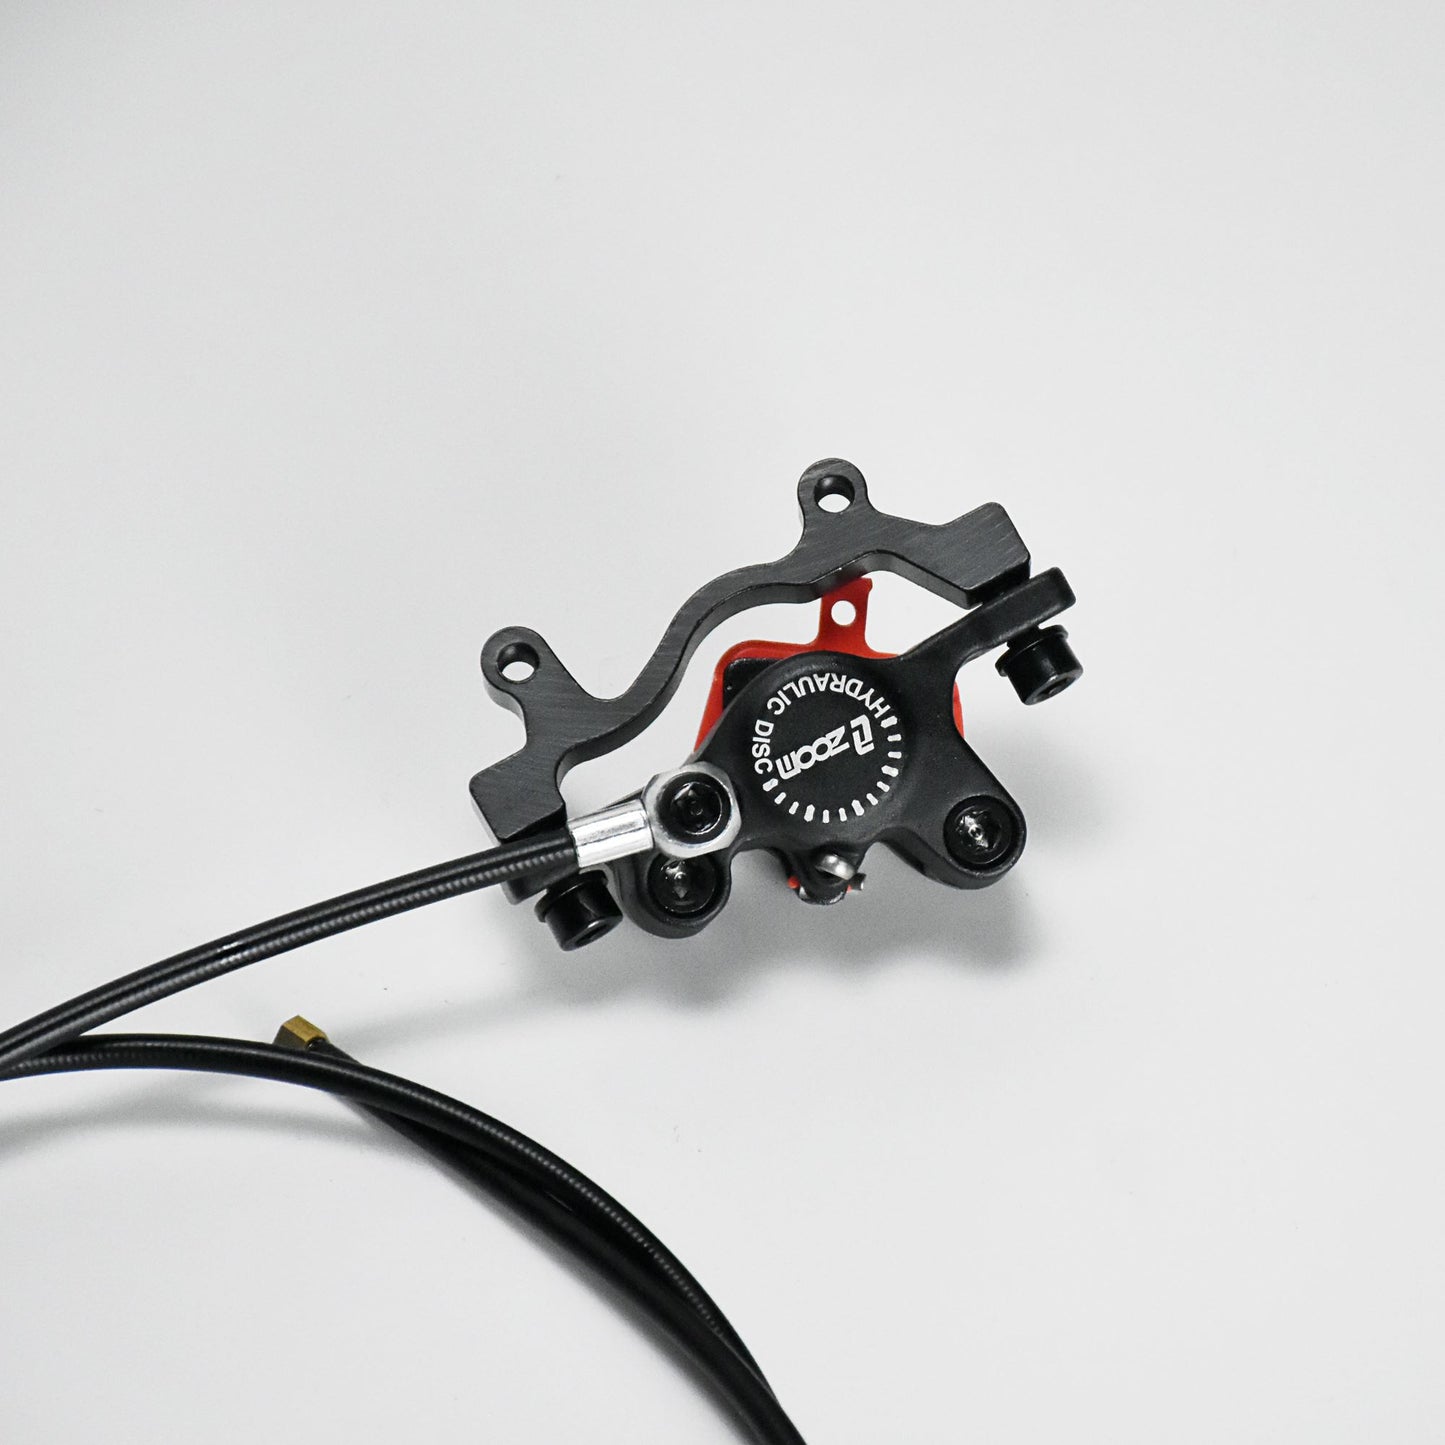 Zoom Electric Scooter Power off Cut-off shifter oil hydraulic disc brake caliper for Boyueda Laotie Quickwheel